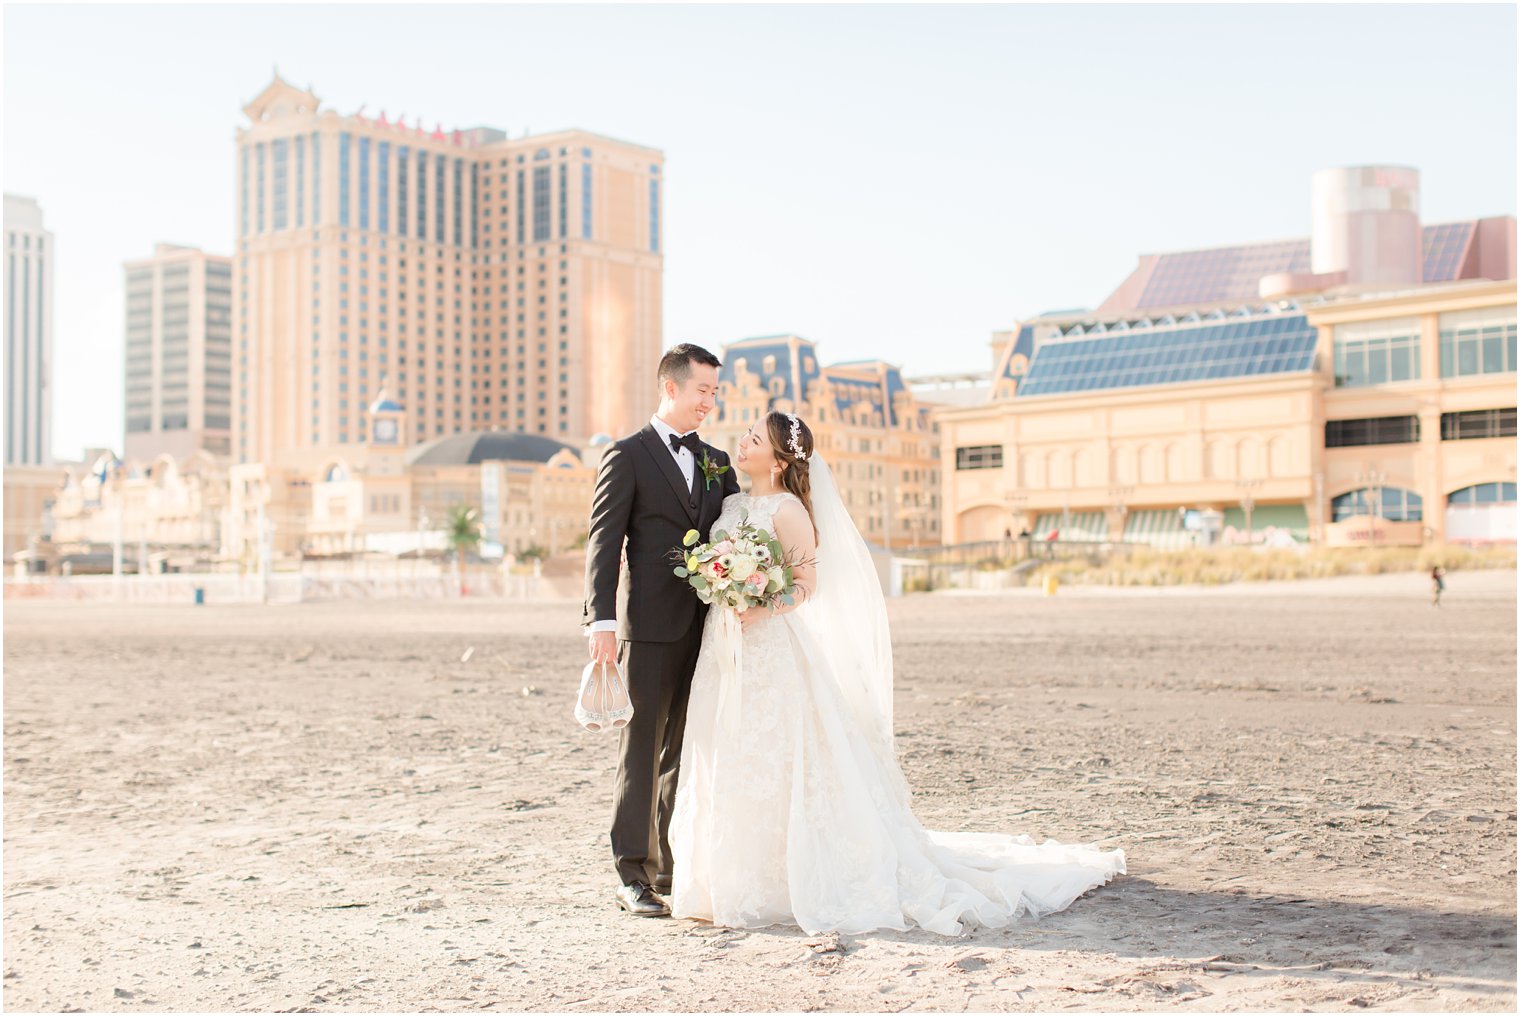 Classic Atlantic City wedding in front of Caesar's Palace